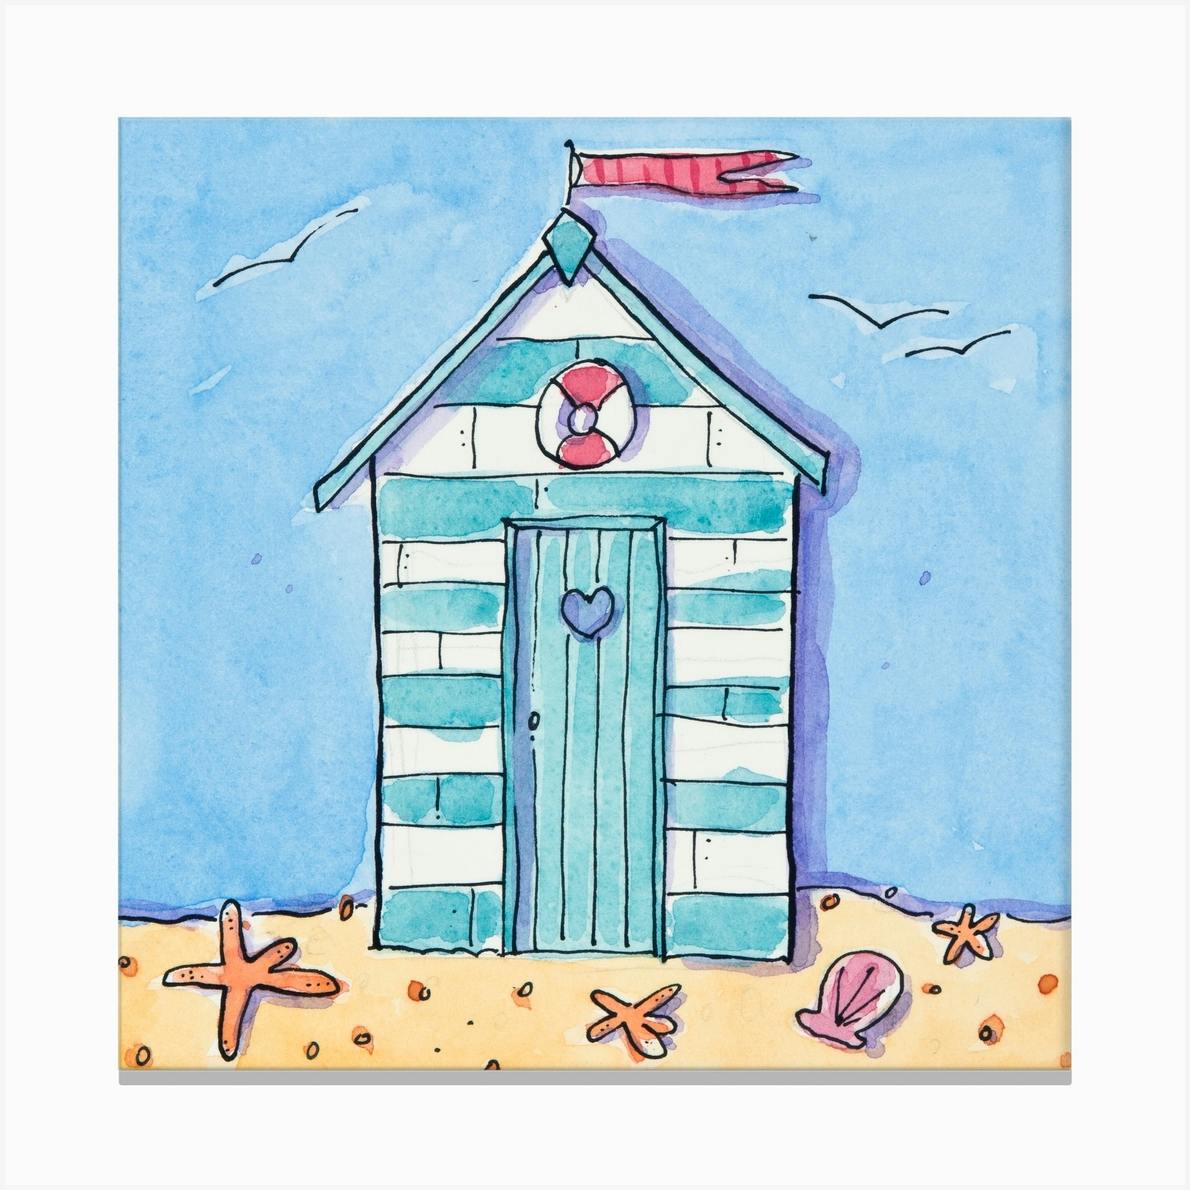 Beach Huts England  I love you  Kate Chidley